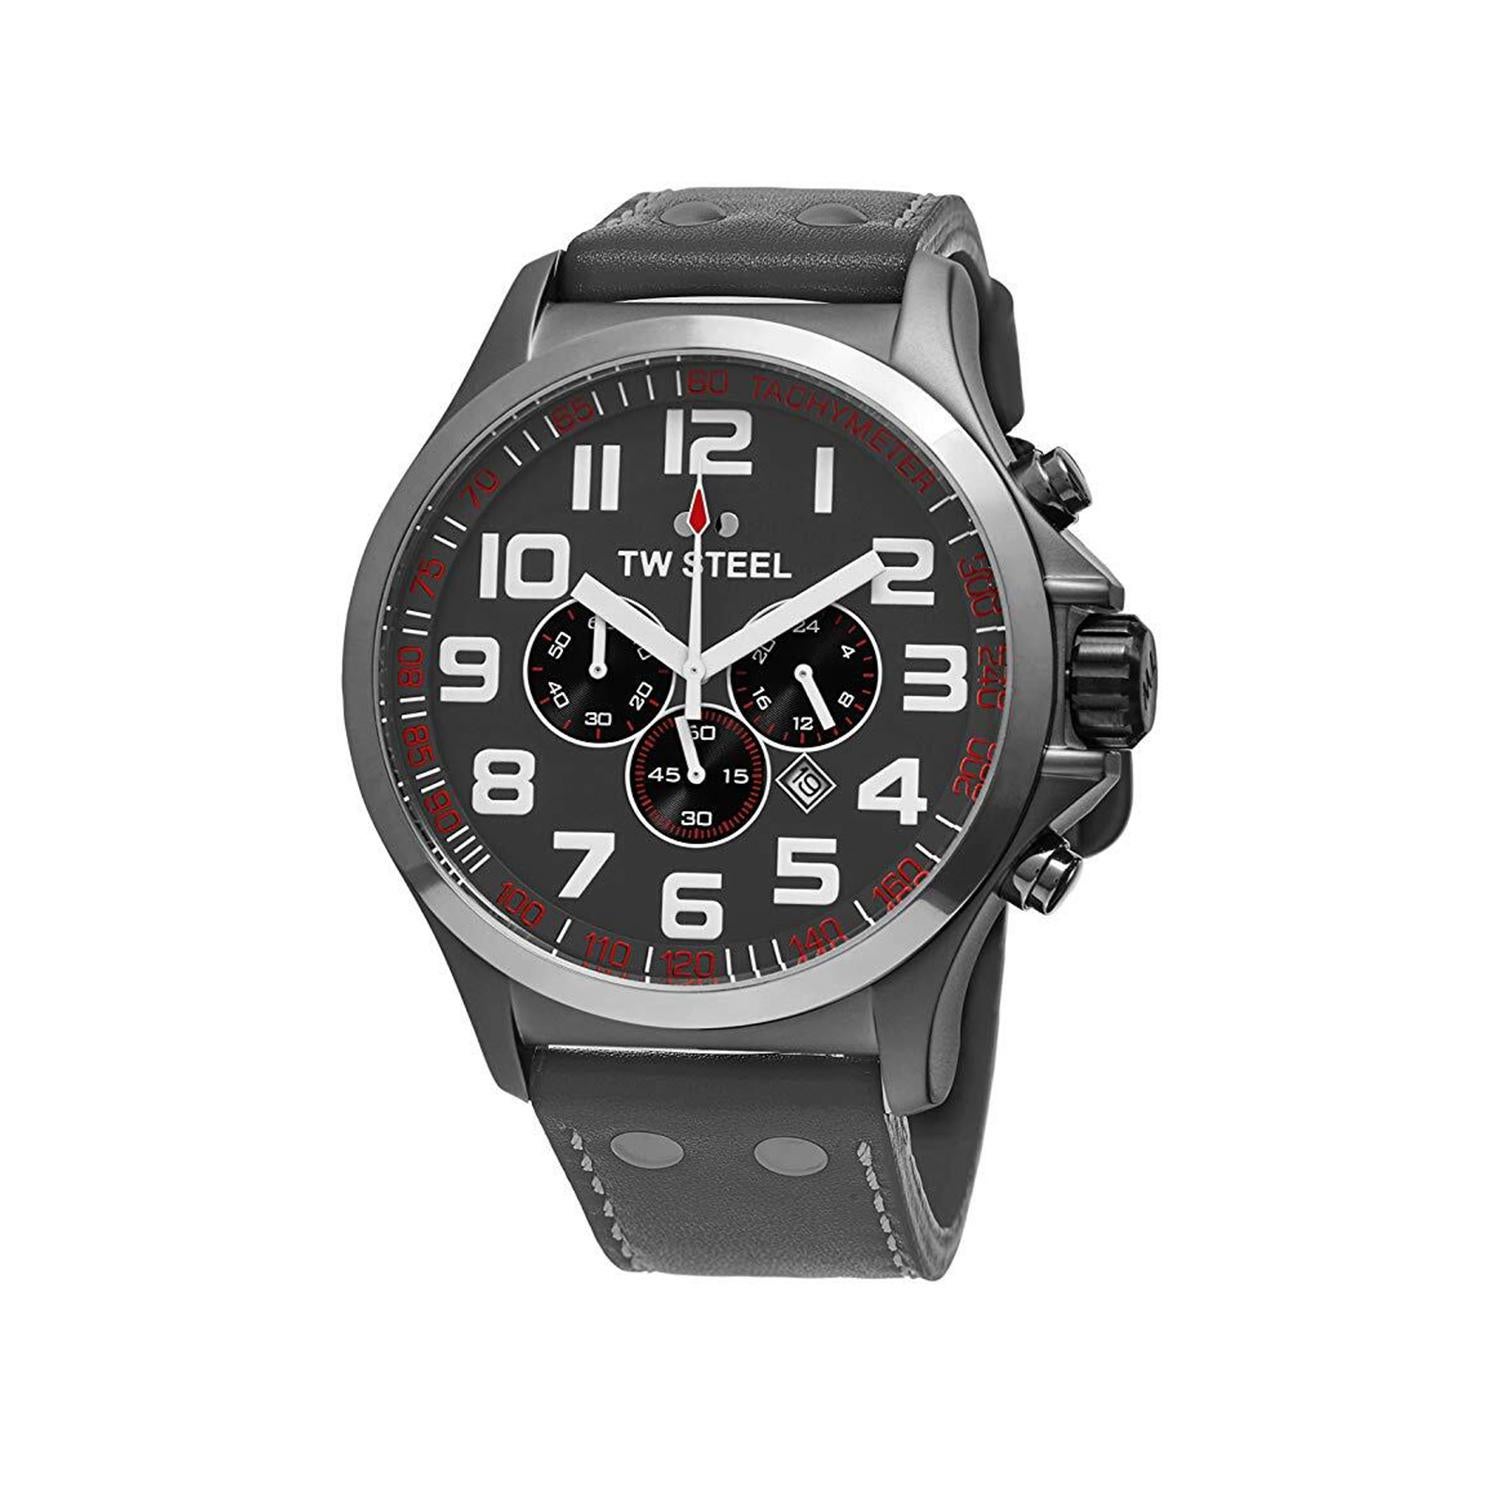 Store display Model.
Can have minor blemishes. 
Comes with original Box.
Brushed sandblasted titanium PVD plated stainless steel case (45 mm in diameter, 13.5 mm thick), Screw-down case-back with embossed TW Steel logo, Polished titanium PVD